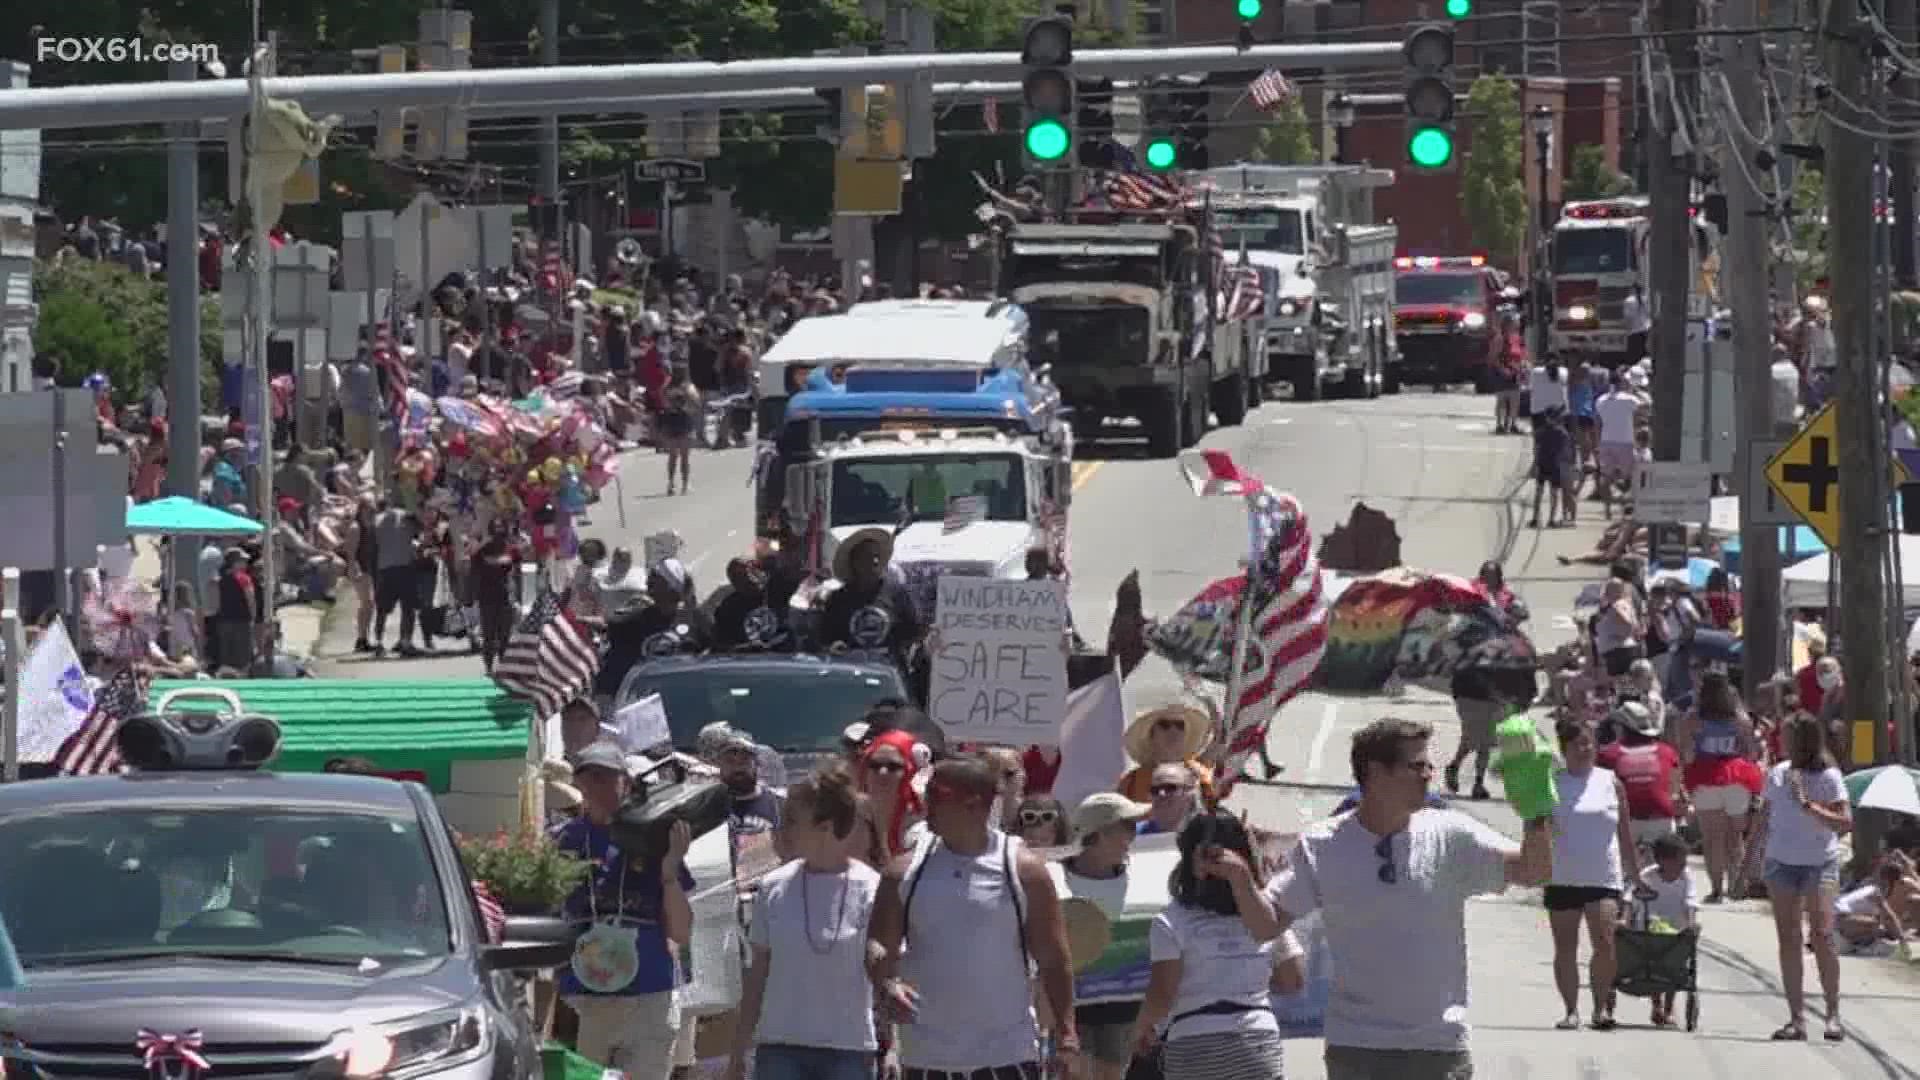 Hundreds of Connecticut residents celebrated the Fourth of July at the 37th annual Boom Box Parade in Willimantic Monday.